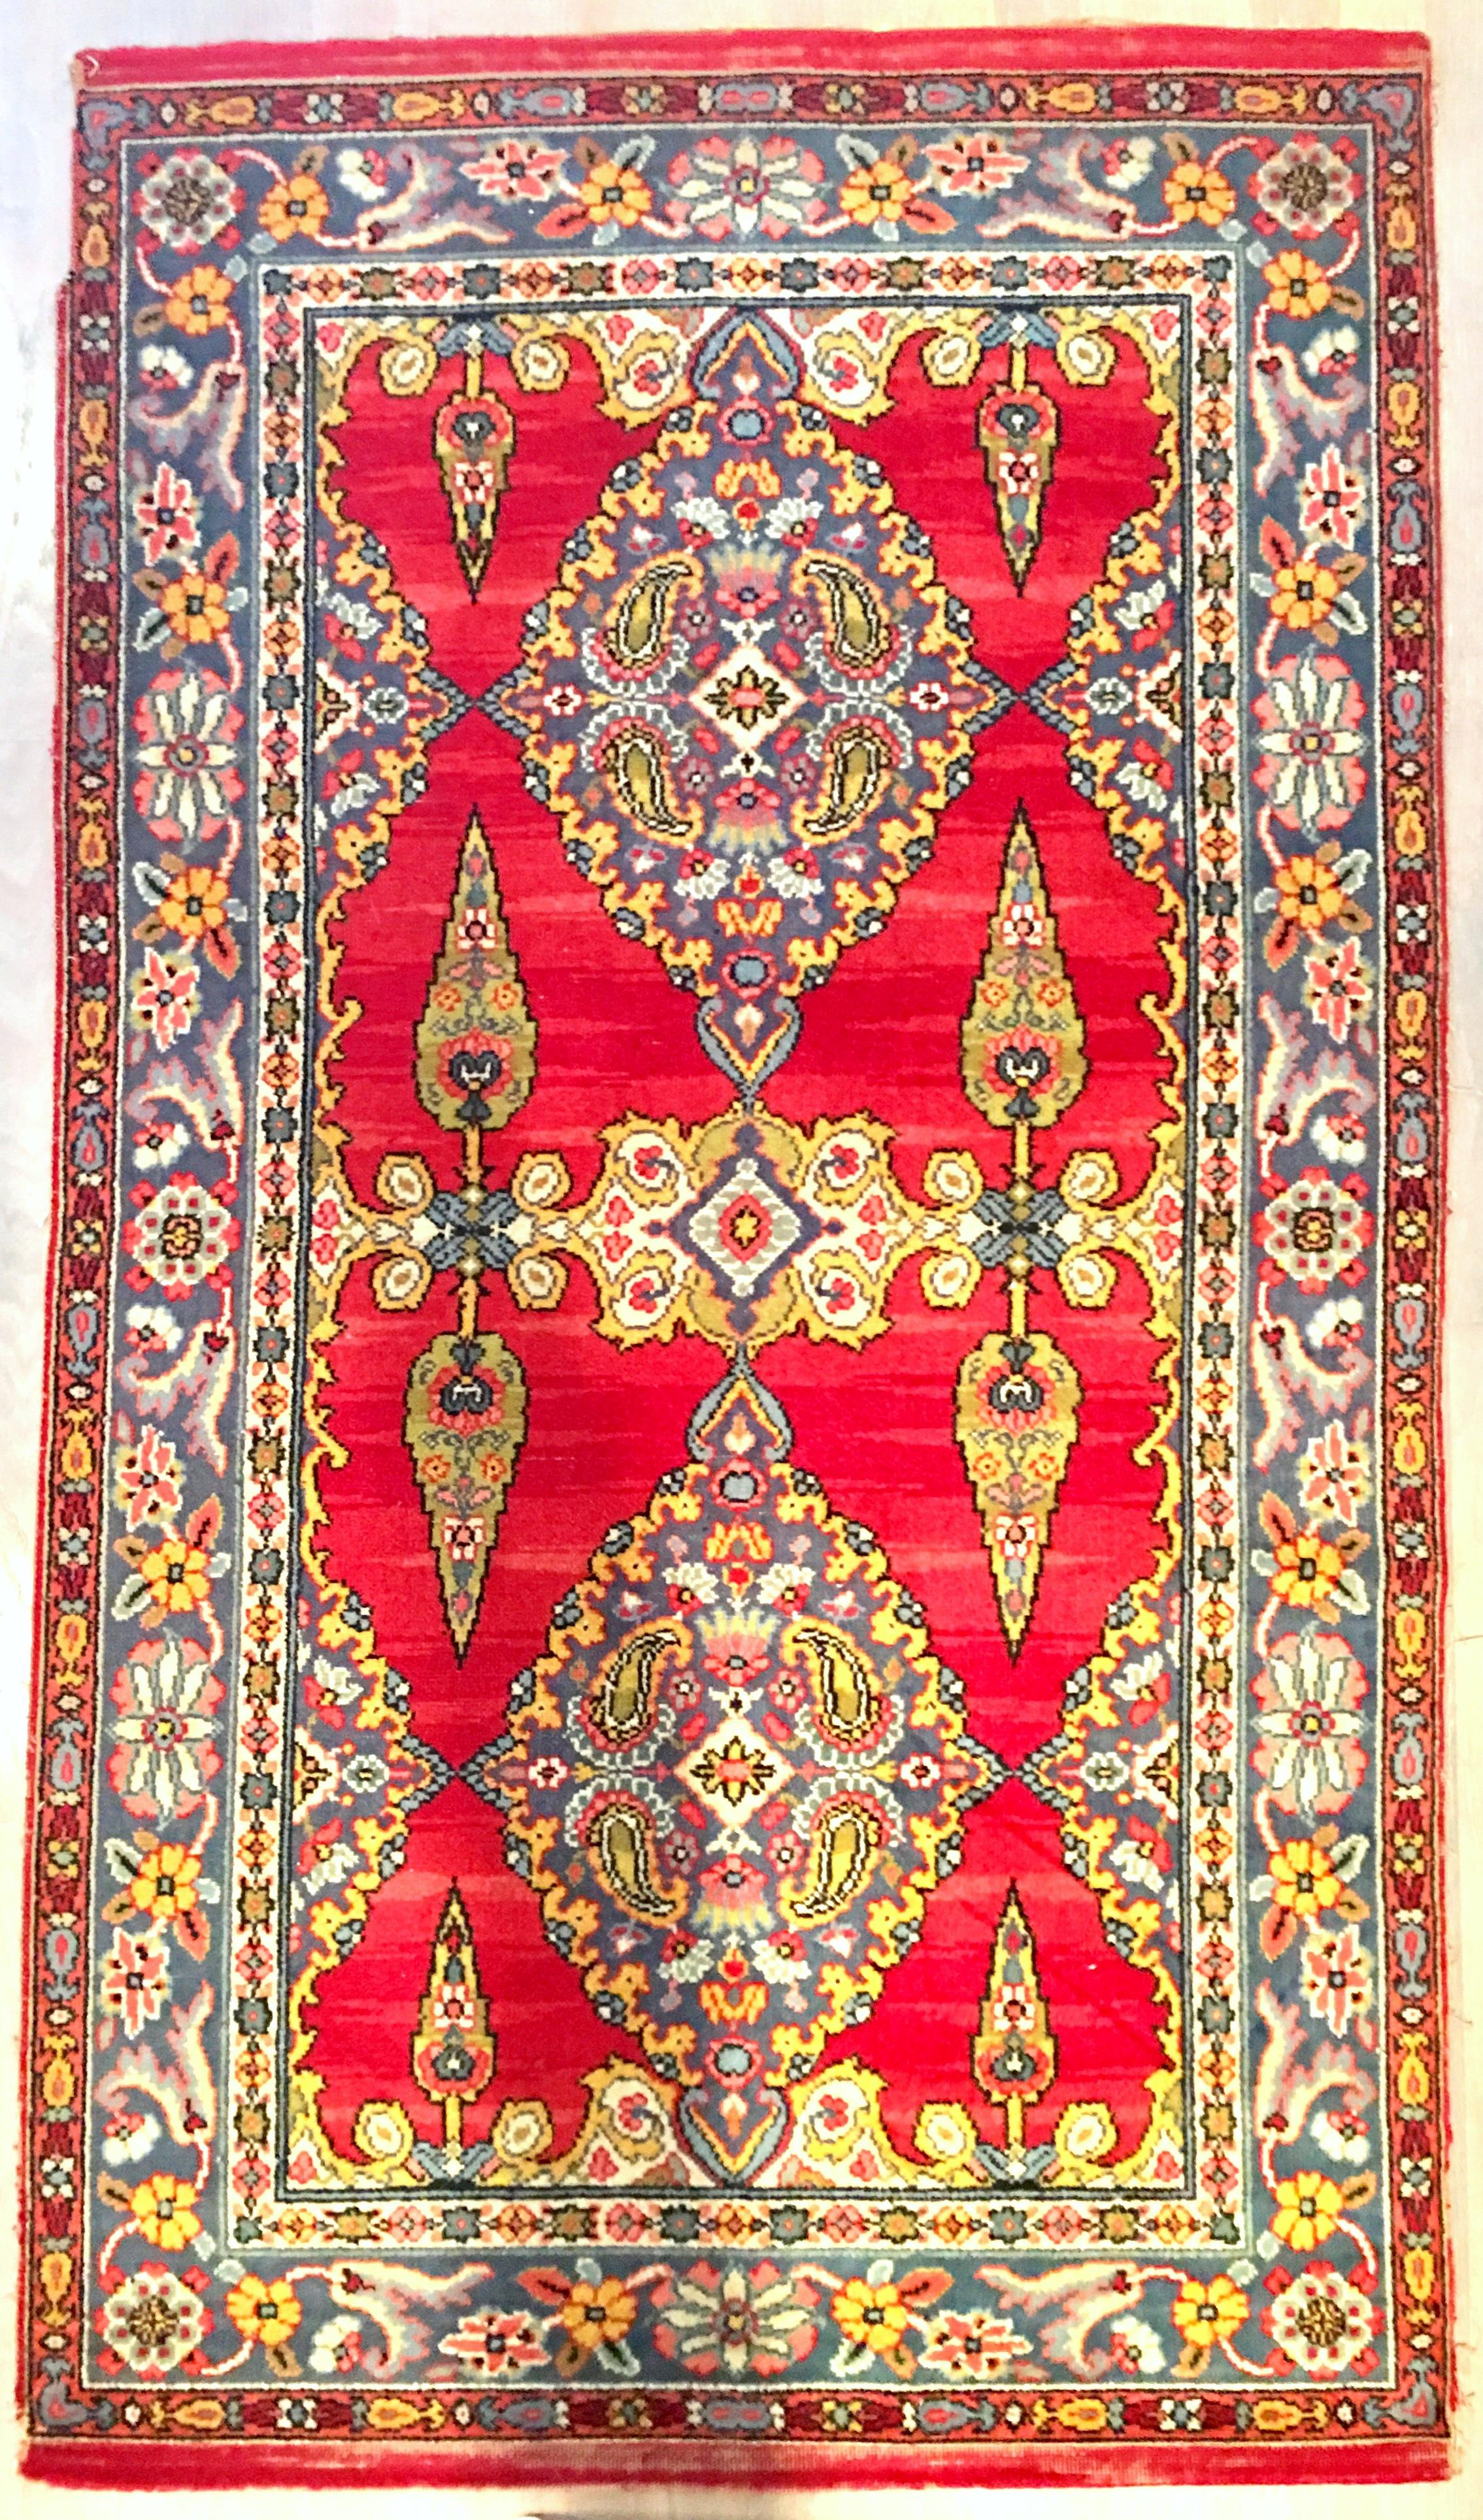 20th Century Classic Silk & Wood Paisley And Floral Blossom Indian Motif hand woven rug. Features, a vivid red ground with amethyst border accented by chartreuse, pink, white, yellow, and several shades of blue.
Most likely from India.
Measures: 3